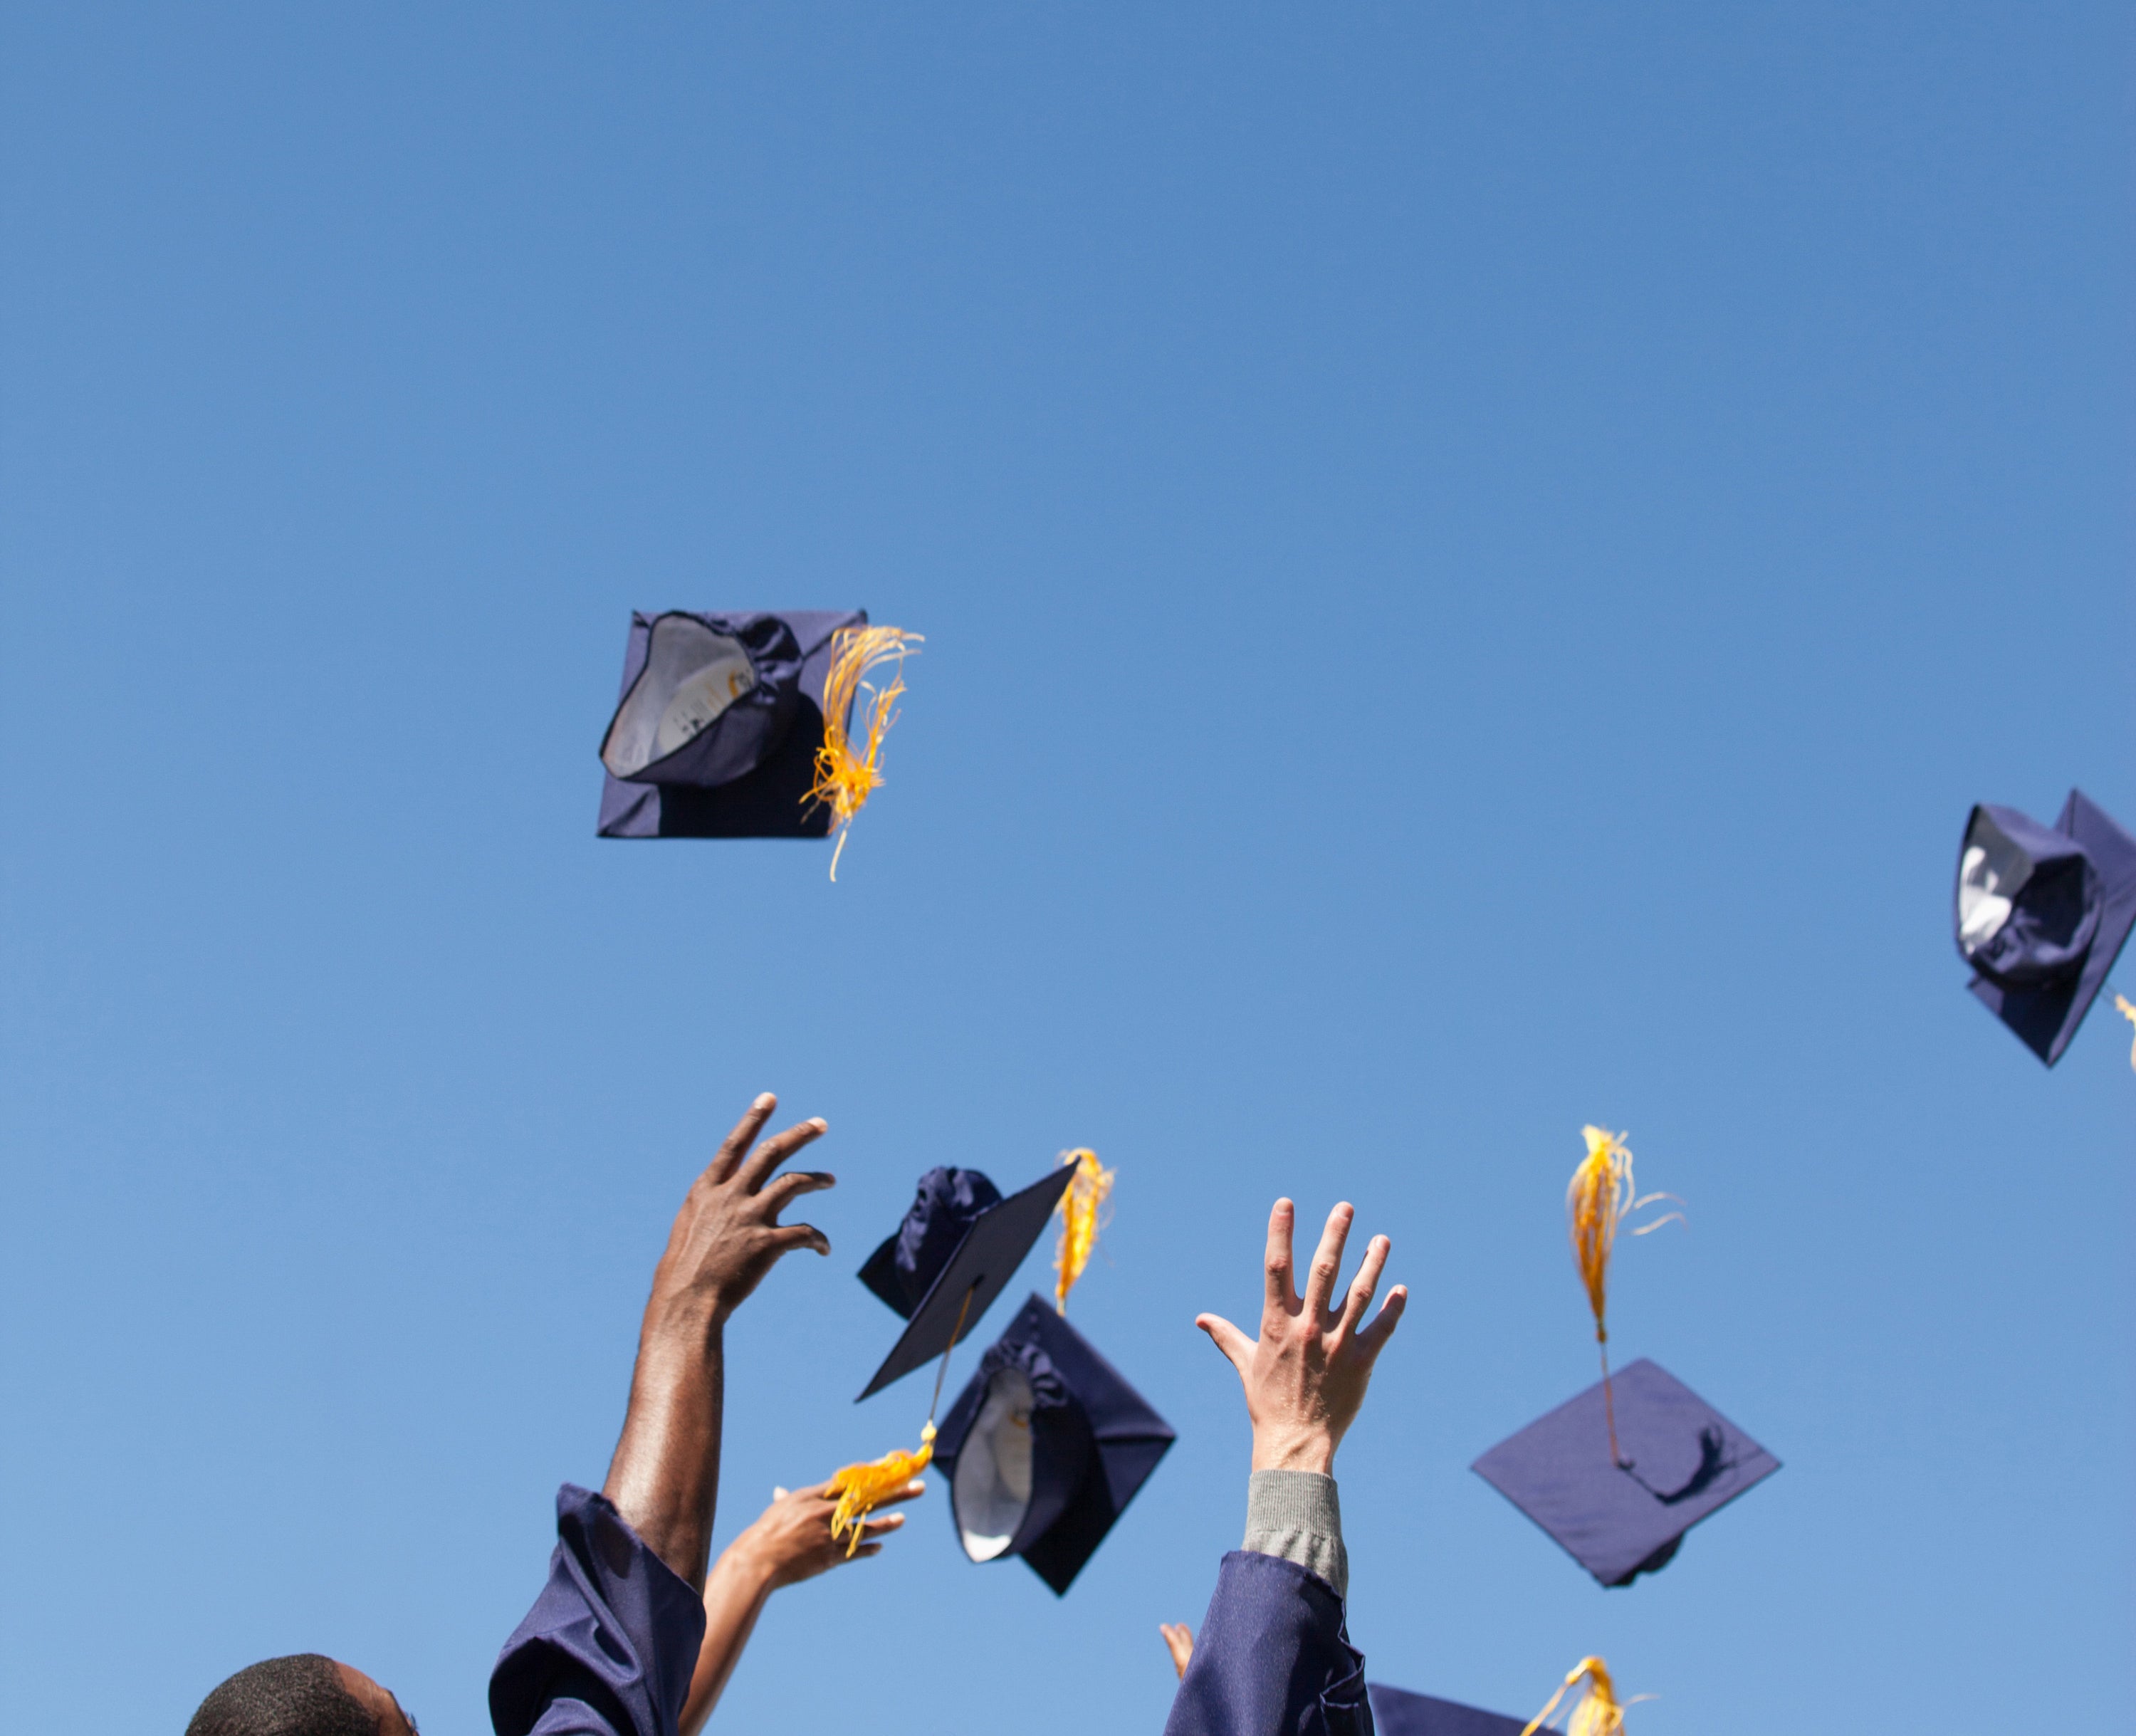 graduating high school students throwing their caps in the air